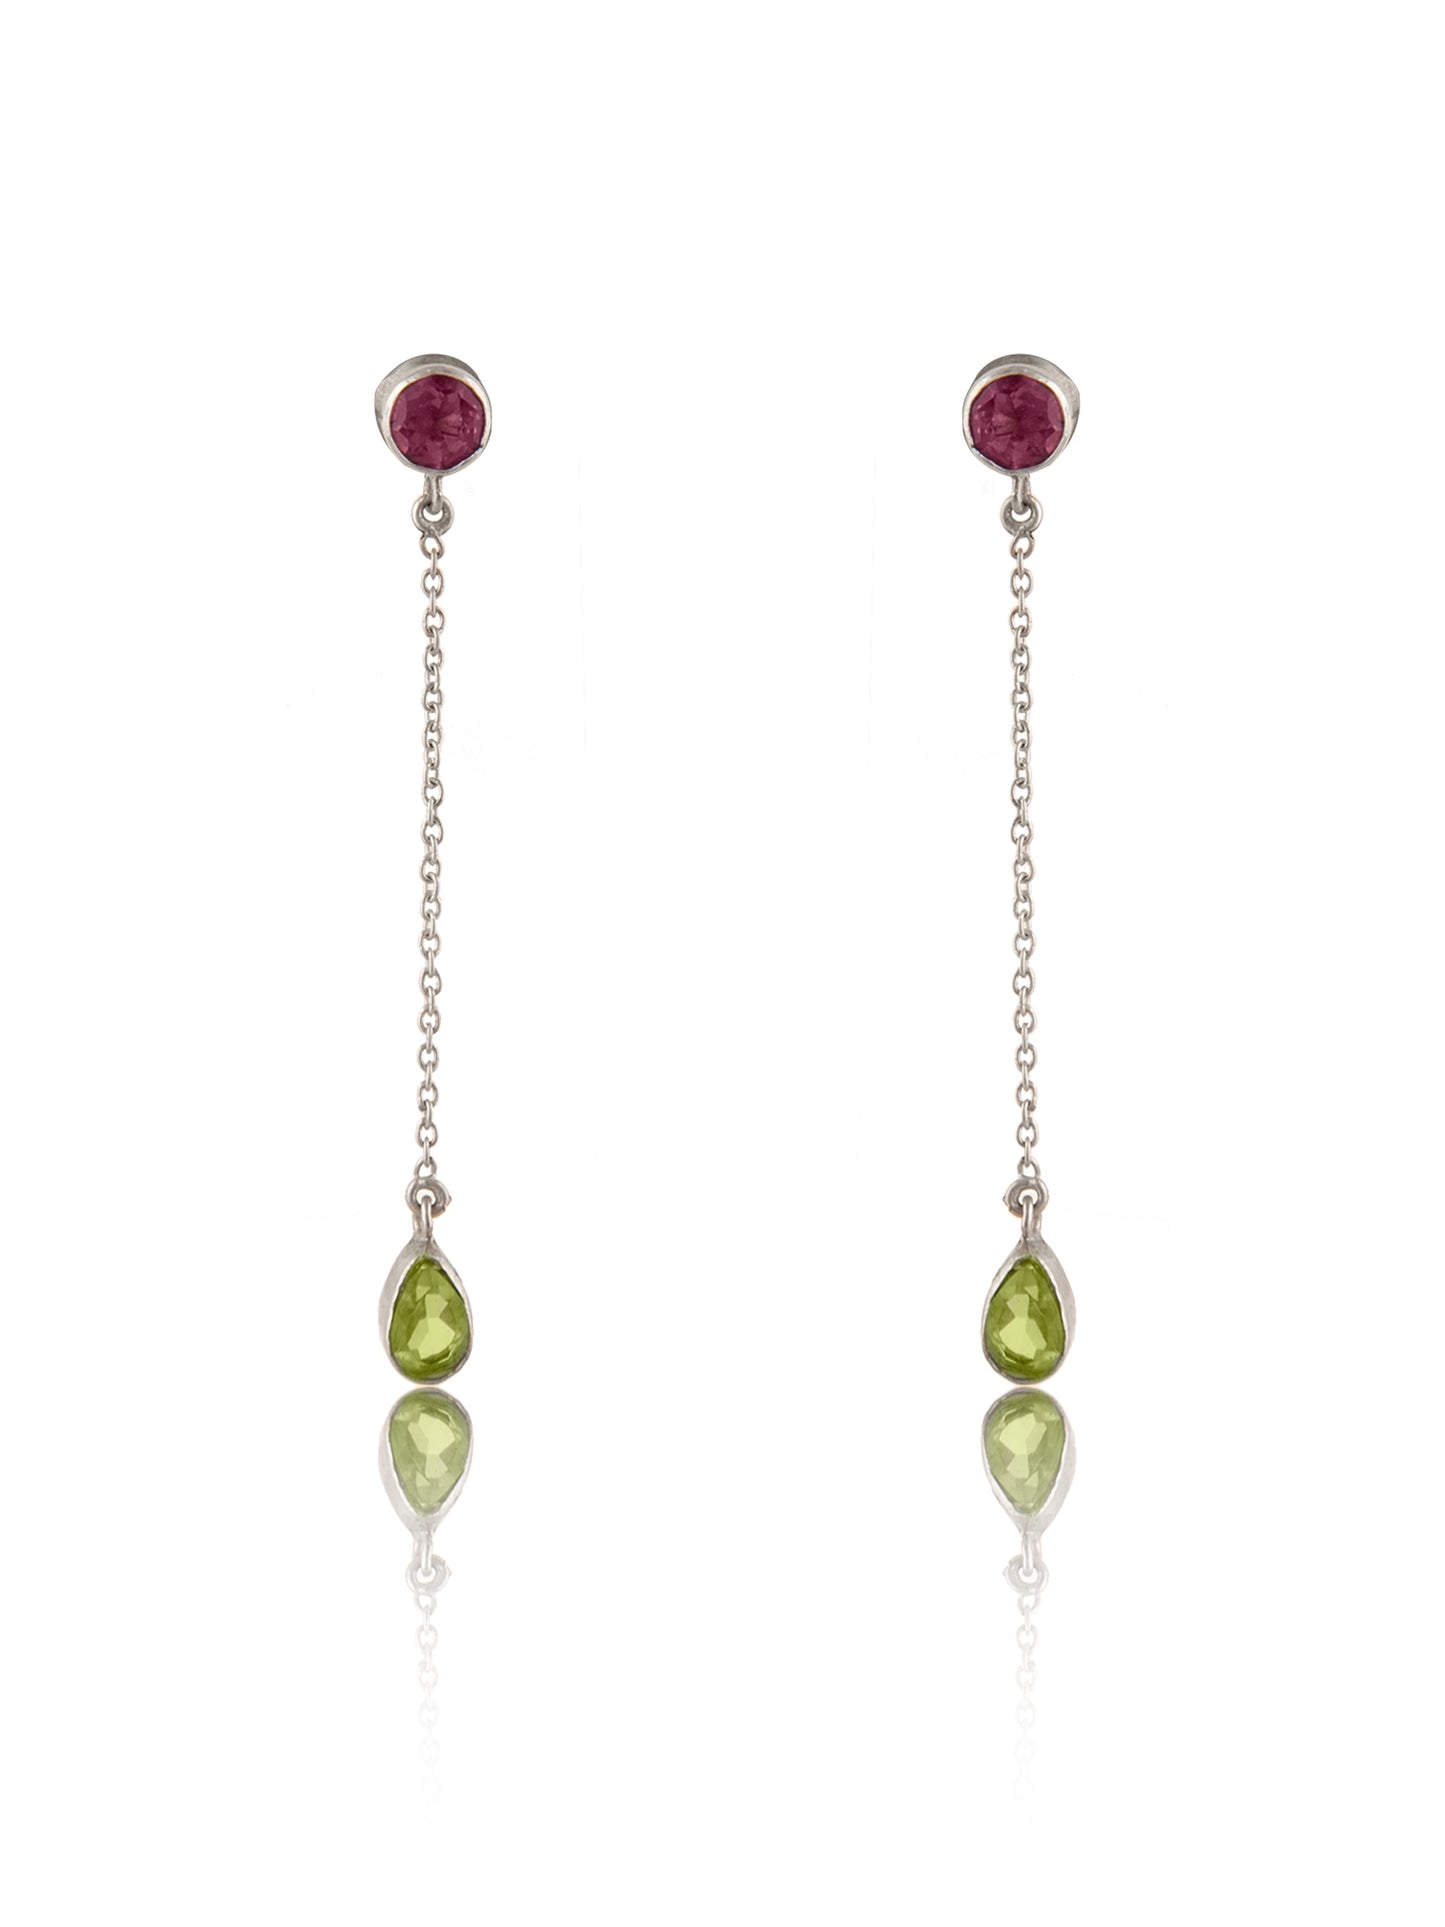 925 Sterling Silver Long Earrings with Multicolored Gemstone